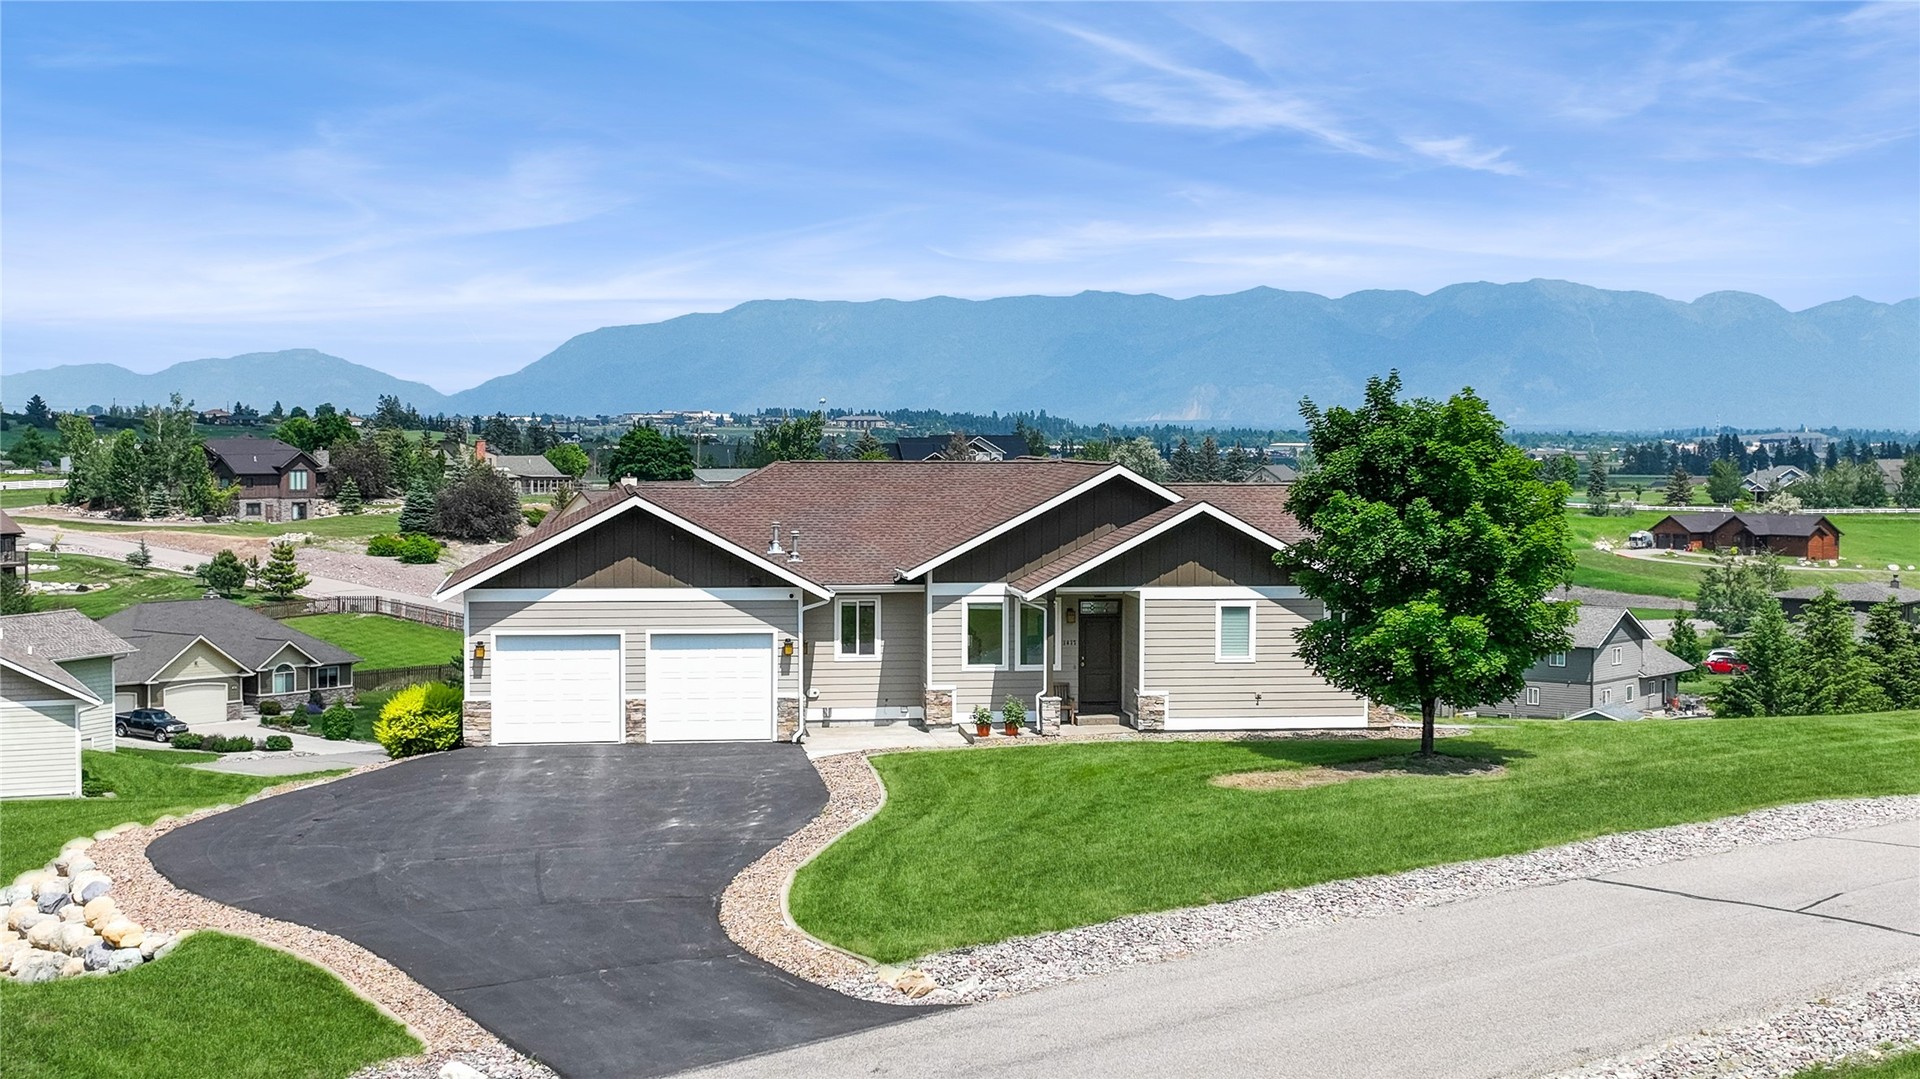 Updated Home on 1 Acre with Mountain Views